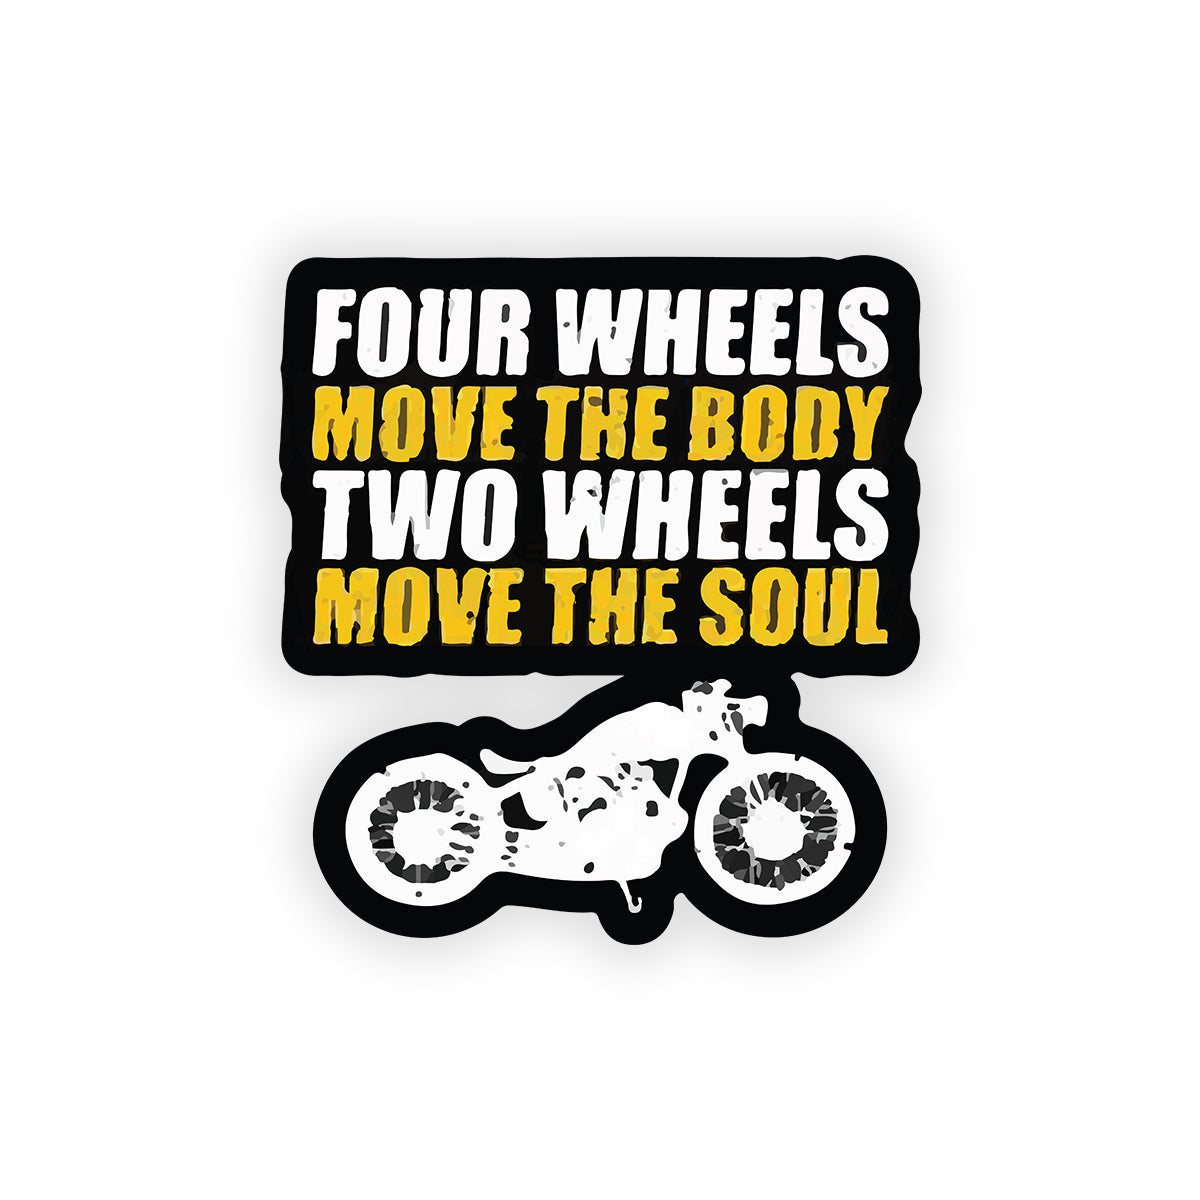 Four wheels move the body two wheels move the soul